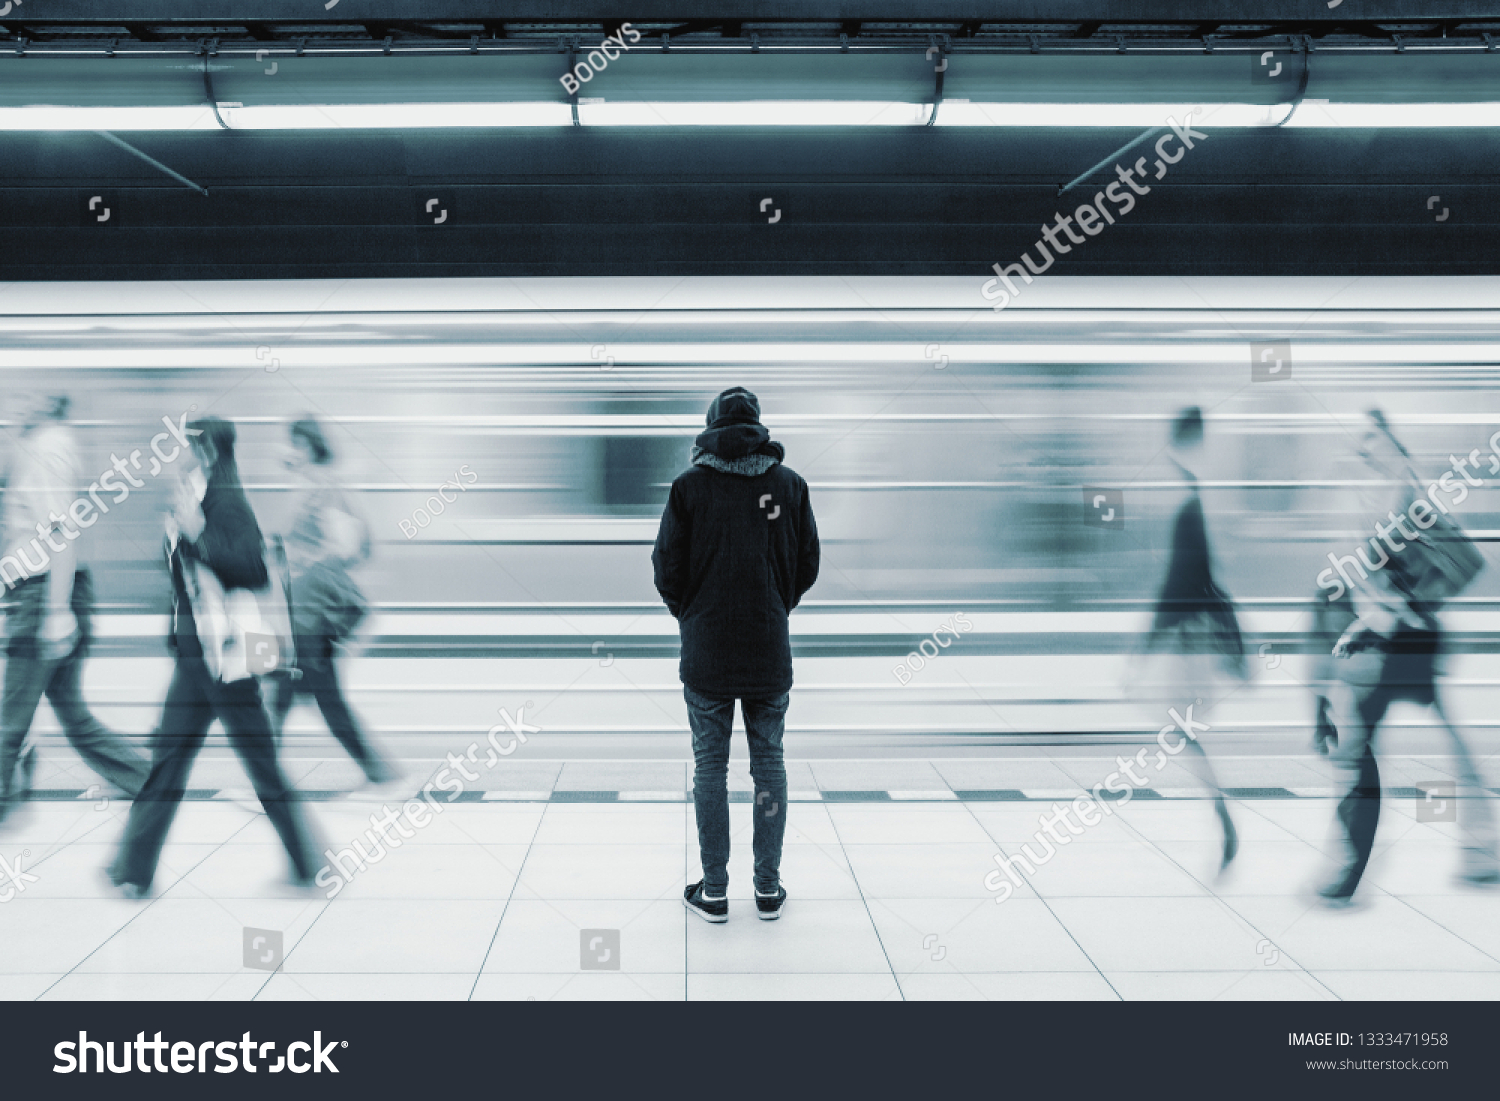 Long exposure picture with lonely young man shot from behind at subway station with blurry moving train and walking people in background #1333471958